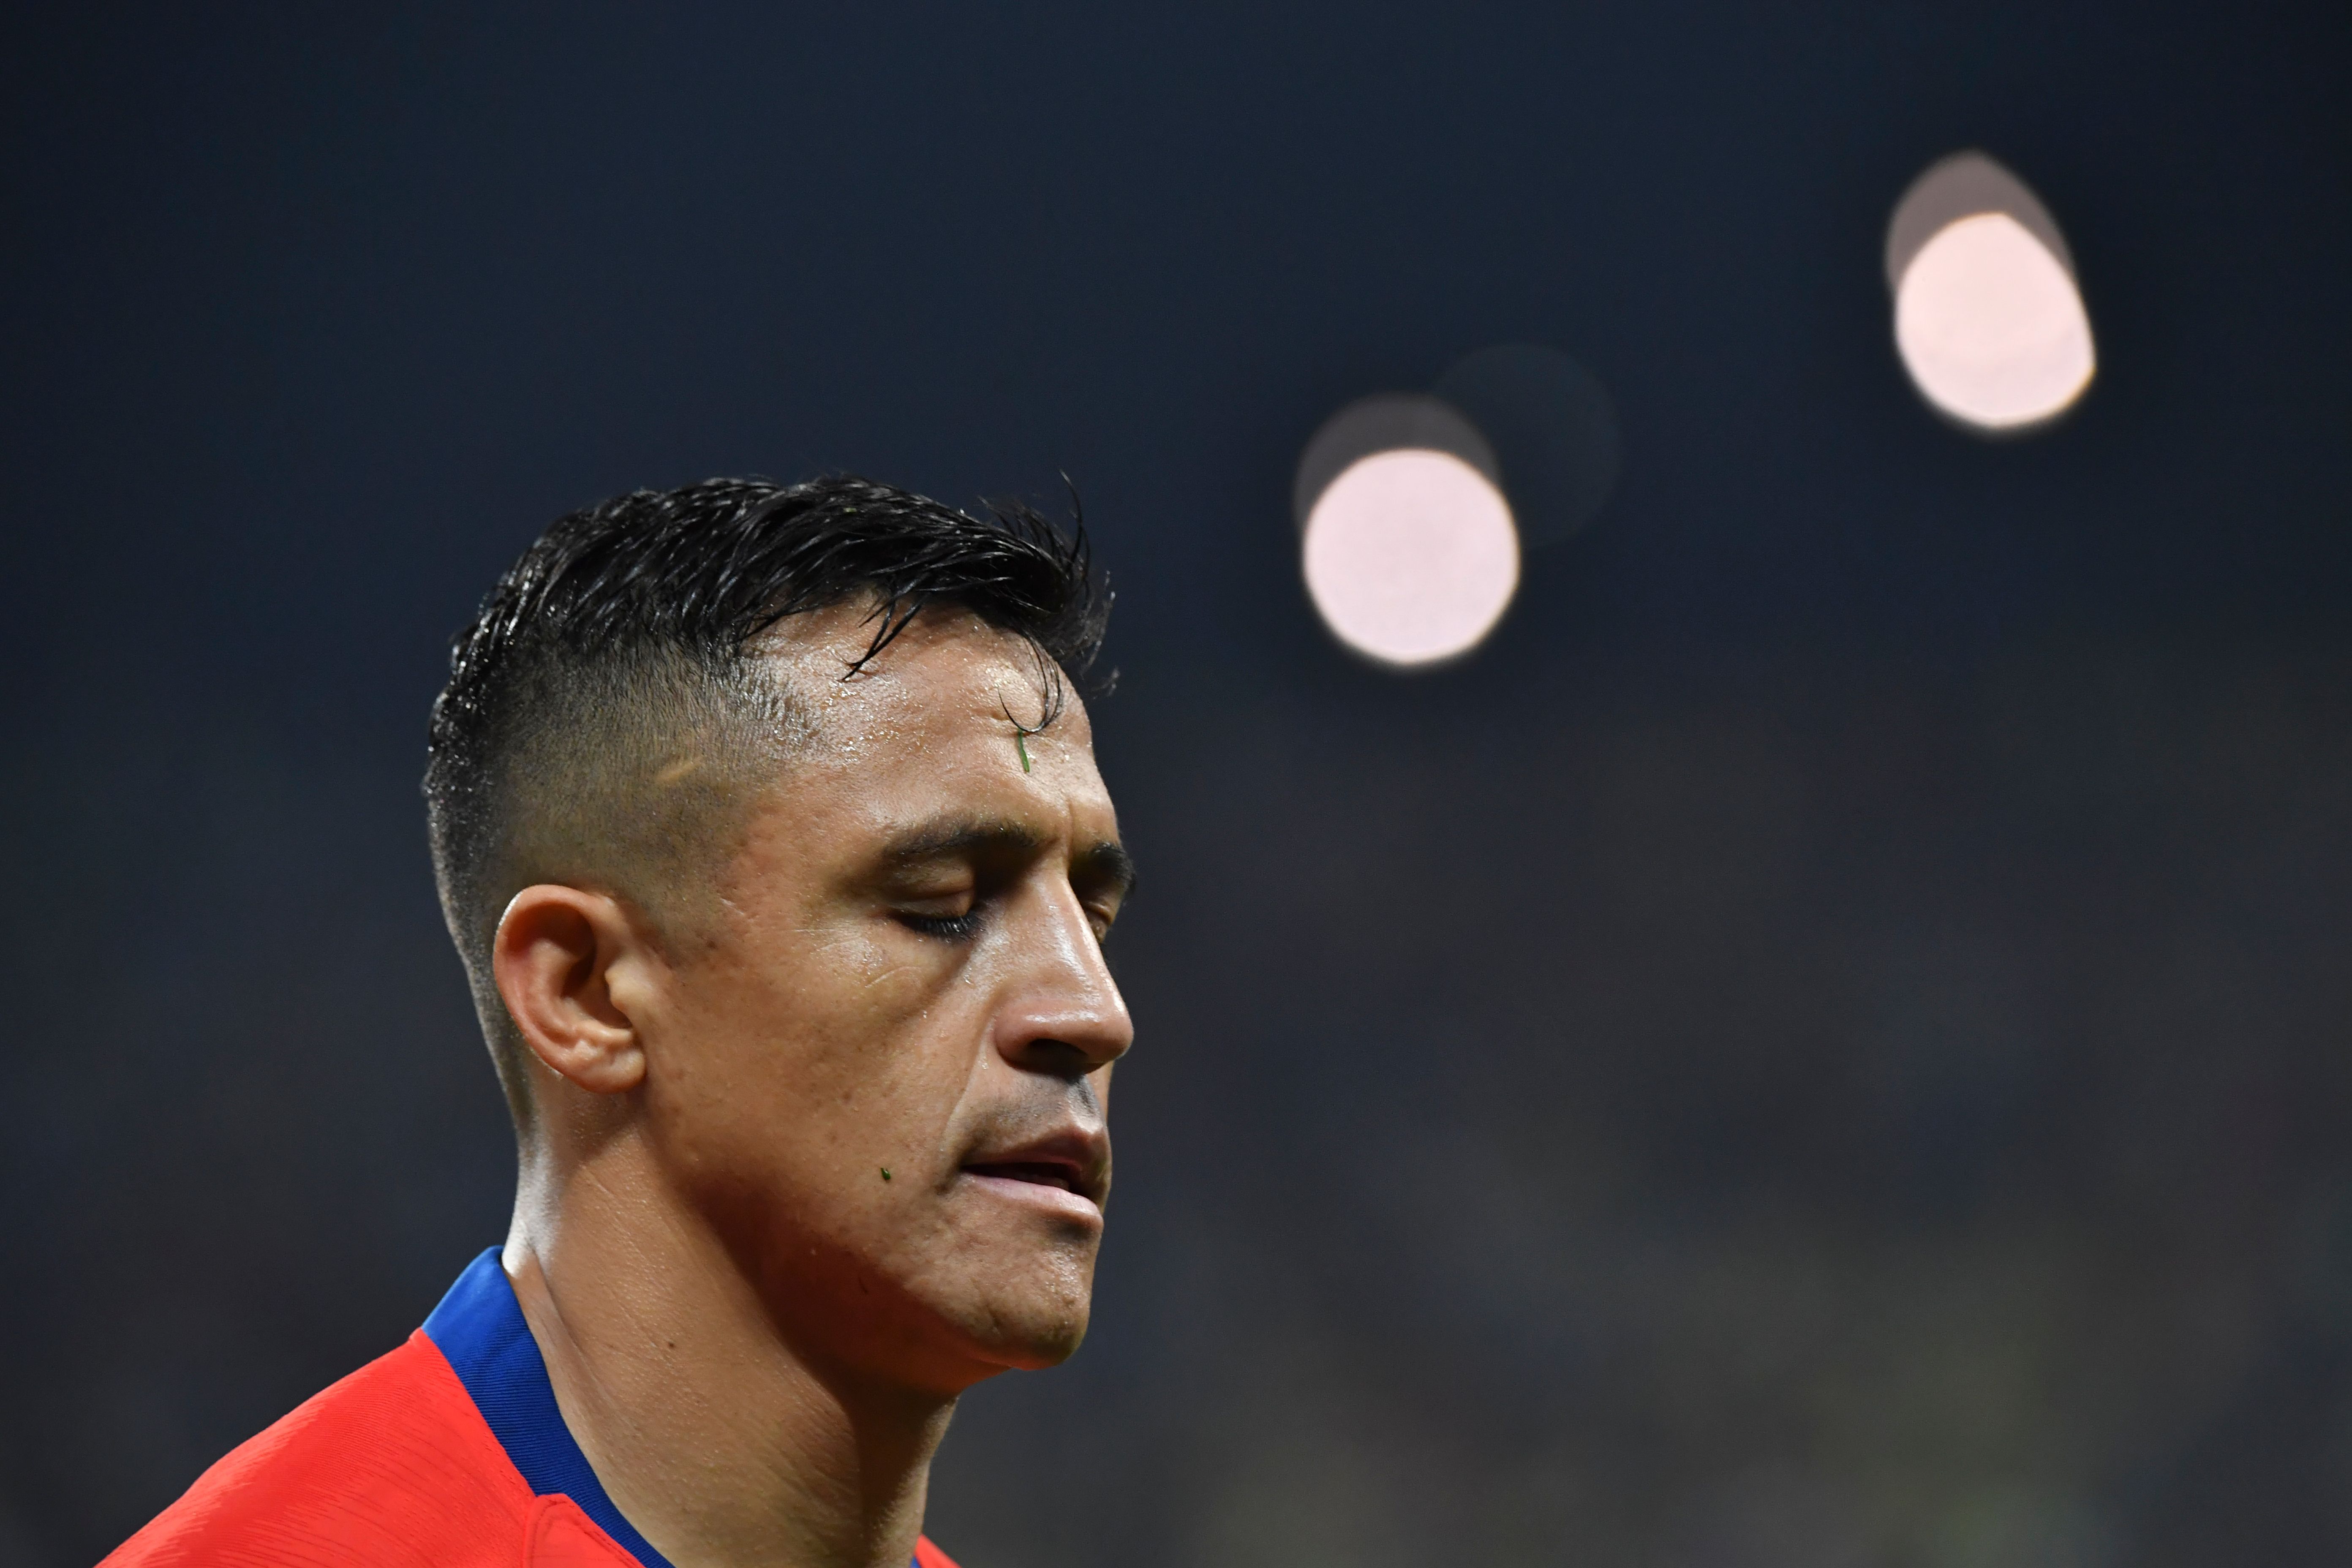 Chile's Alexis Sanchez is pictured during the Copa America football tournament quarter-final match against Colombia at the Corinthians Arena in Sao Paulo, Brazil, on June 28, 2019. (Photo by Nelson ALMEIDA / AFP)        (Photo credit should read NELSON ALMEIDA/AFP/Getty Images)